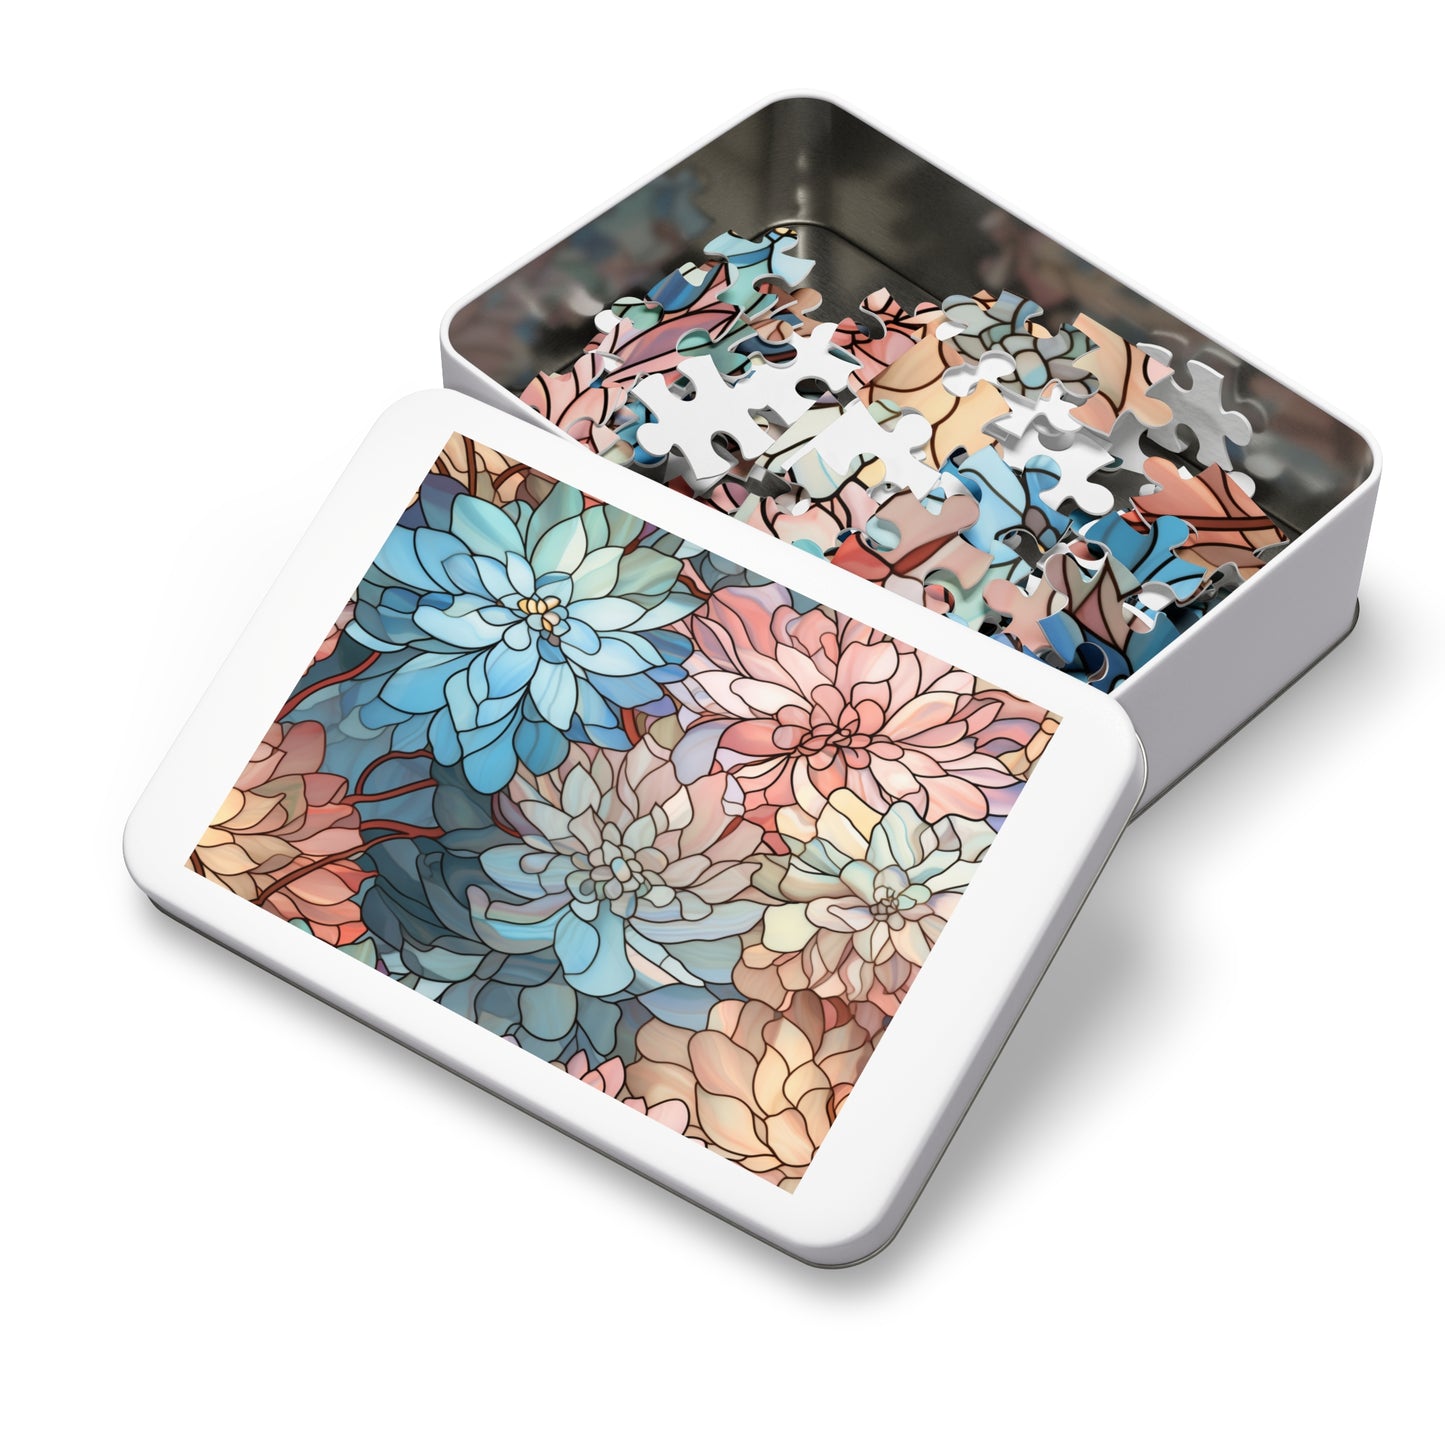 Stained Glass Flowers Jigsaw Puzzle (30, 110, 252, 500,1000-Piece)